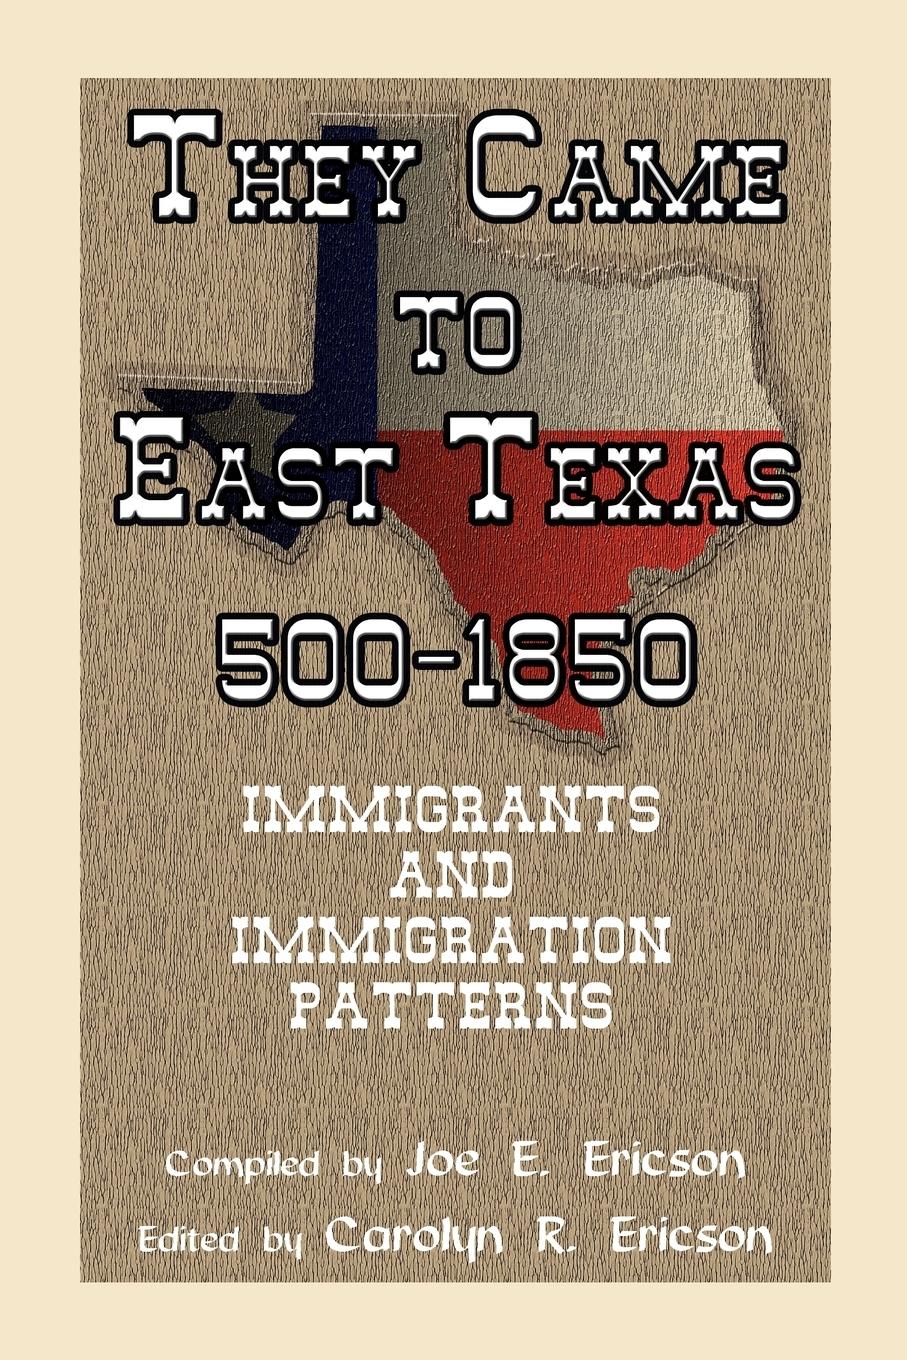 They Came to East Texas, 500-1850, Immigrants and Immigration Patterns - Ericson, Joe E. Ericson, Carolyn Reeves